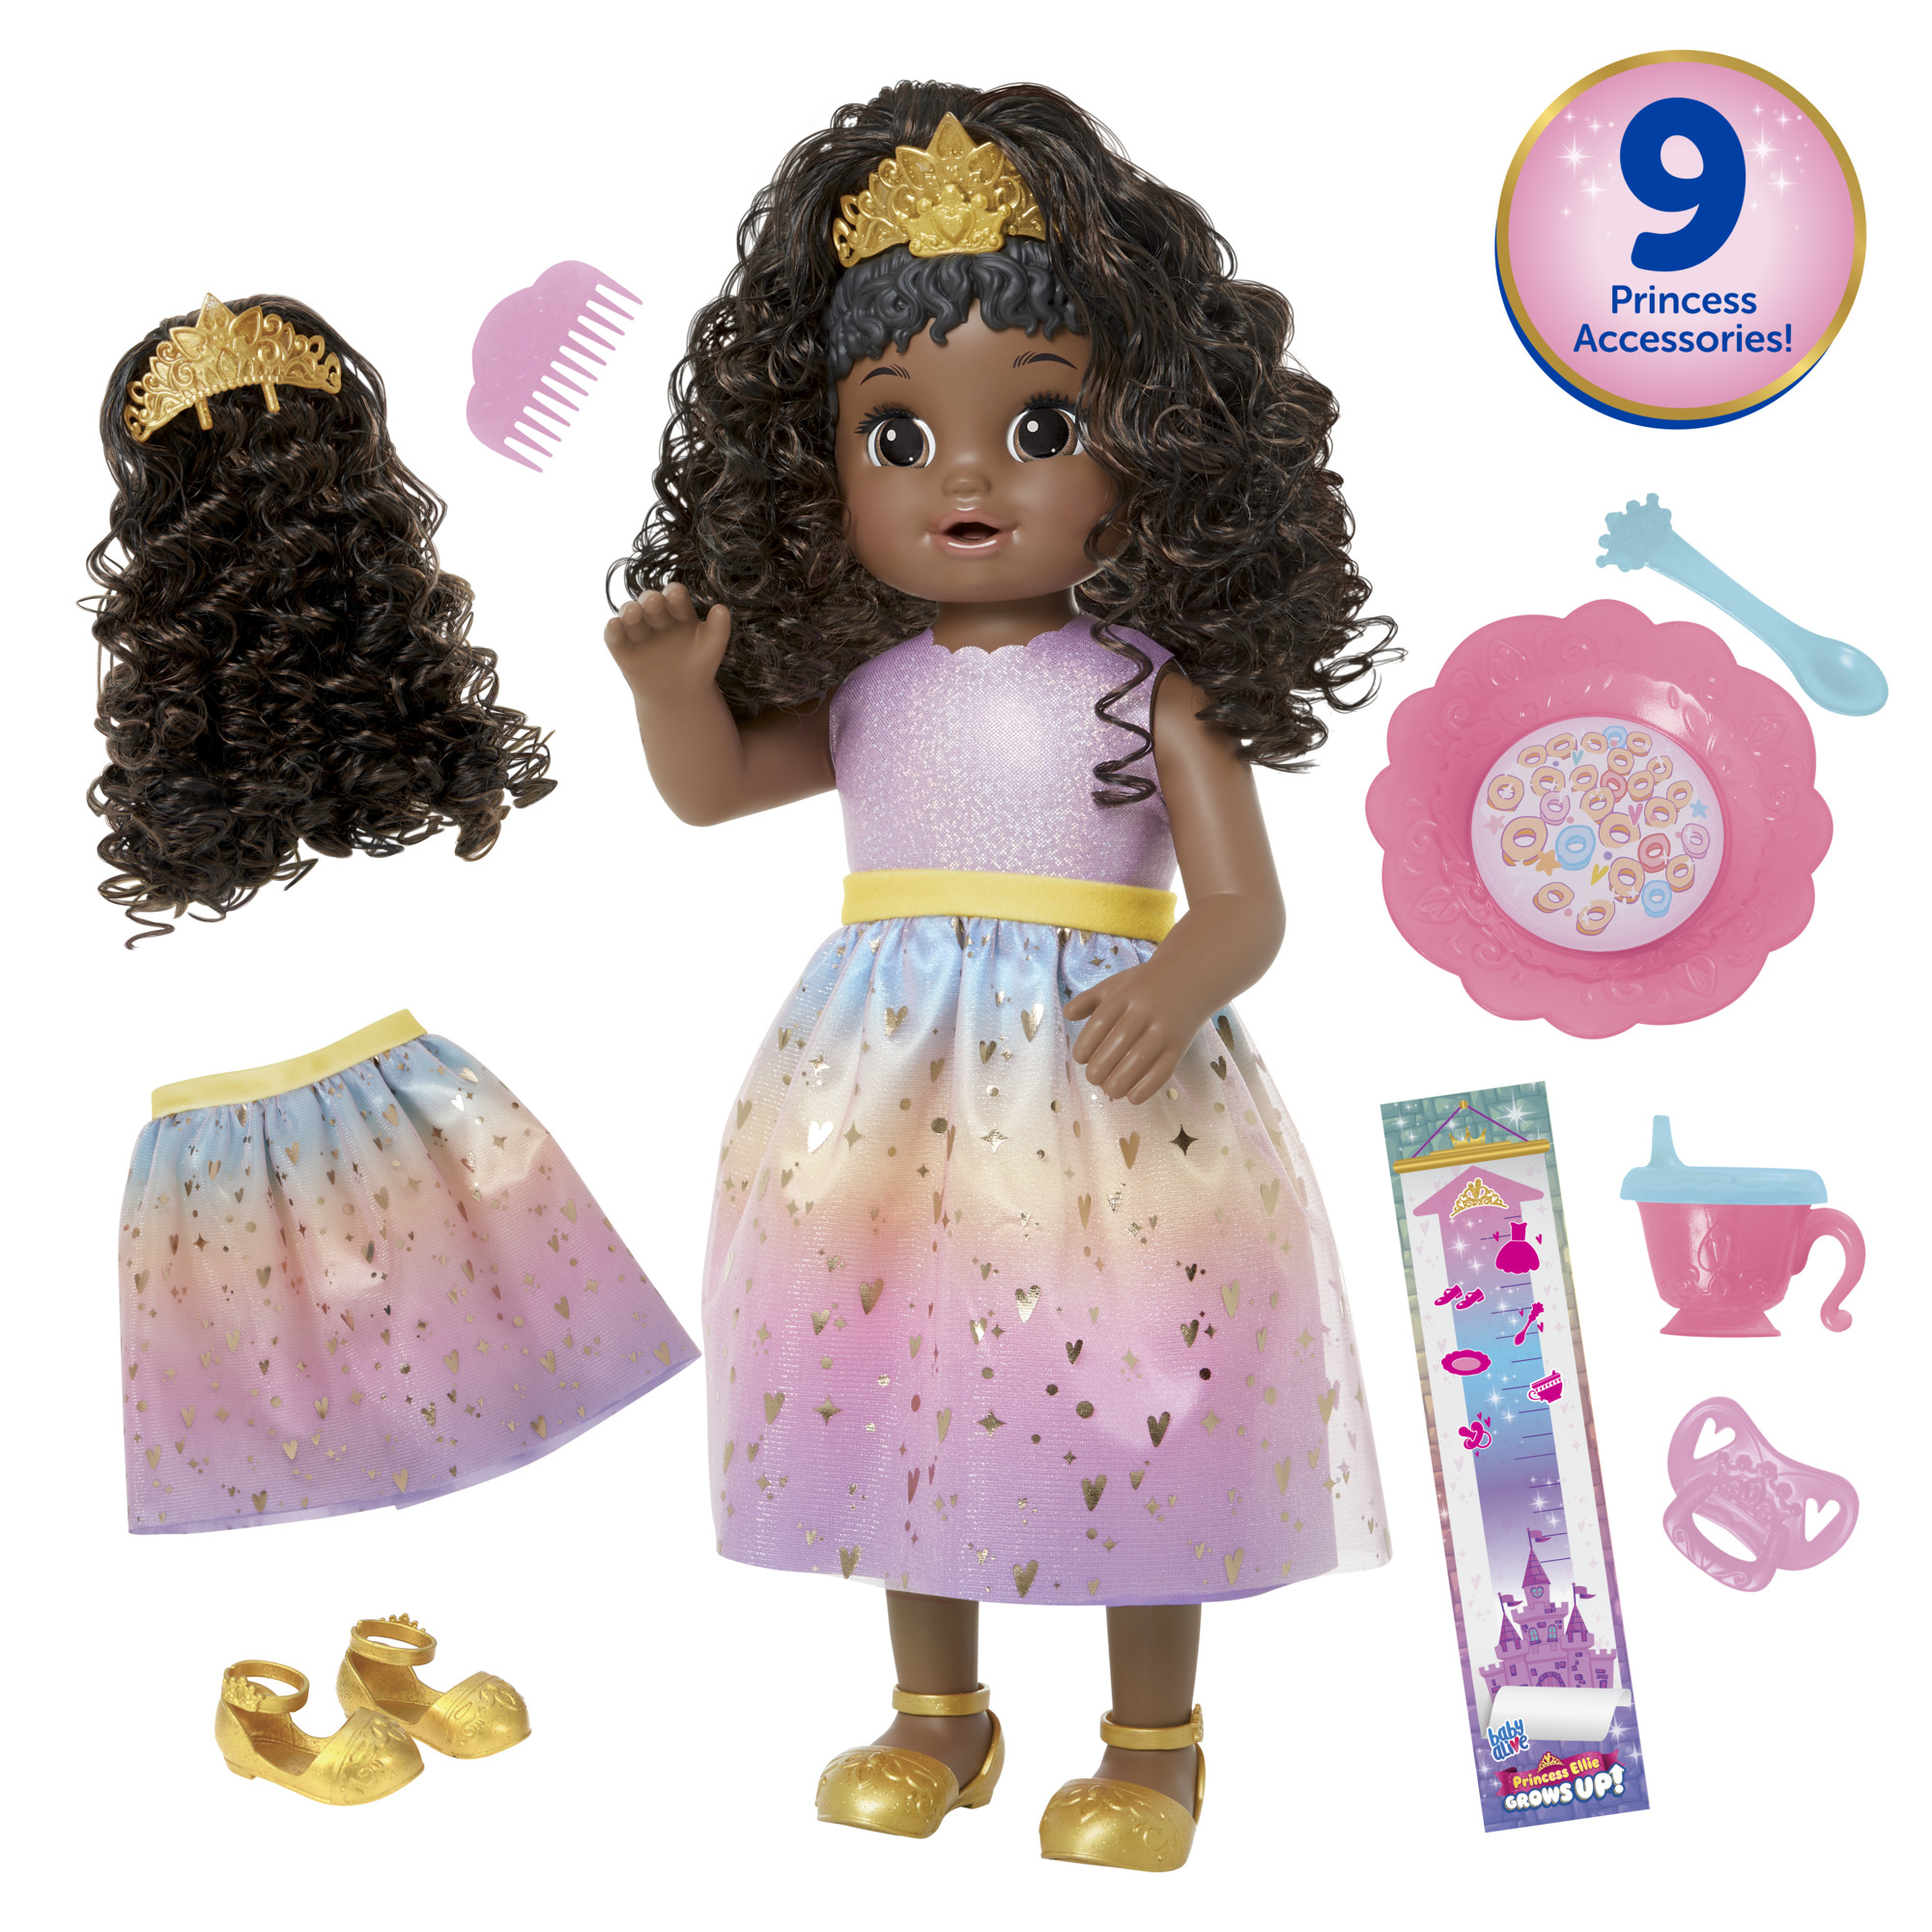 Baby Alive: Princess Ellie Grows Up! 15-Inch Doll Black Hair, Brown Eyes Kids Toy for Boys and Girls - image 1 of 12